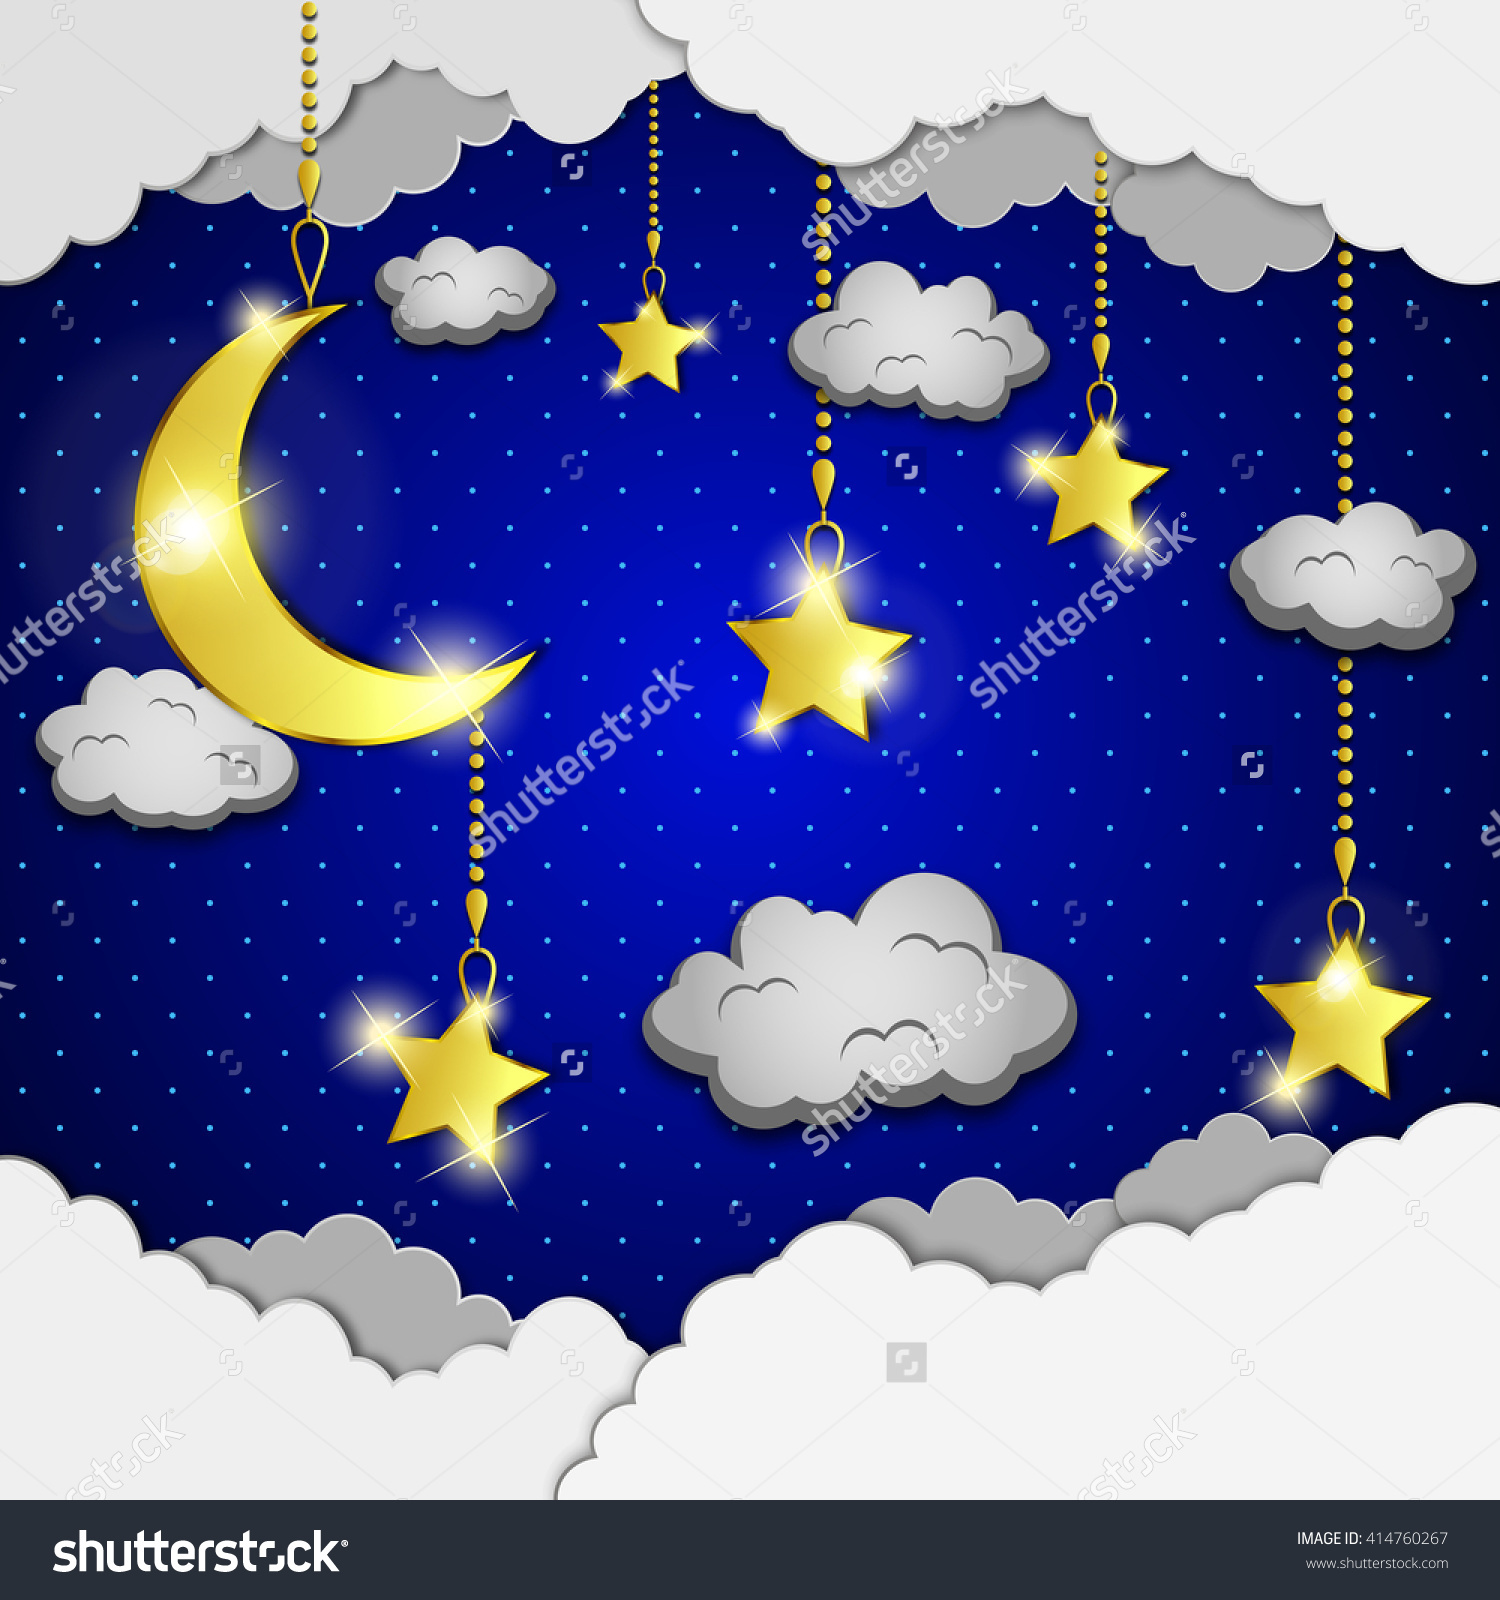 Vector background with evening sky. Moon and stars in the clouds.